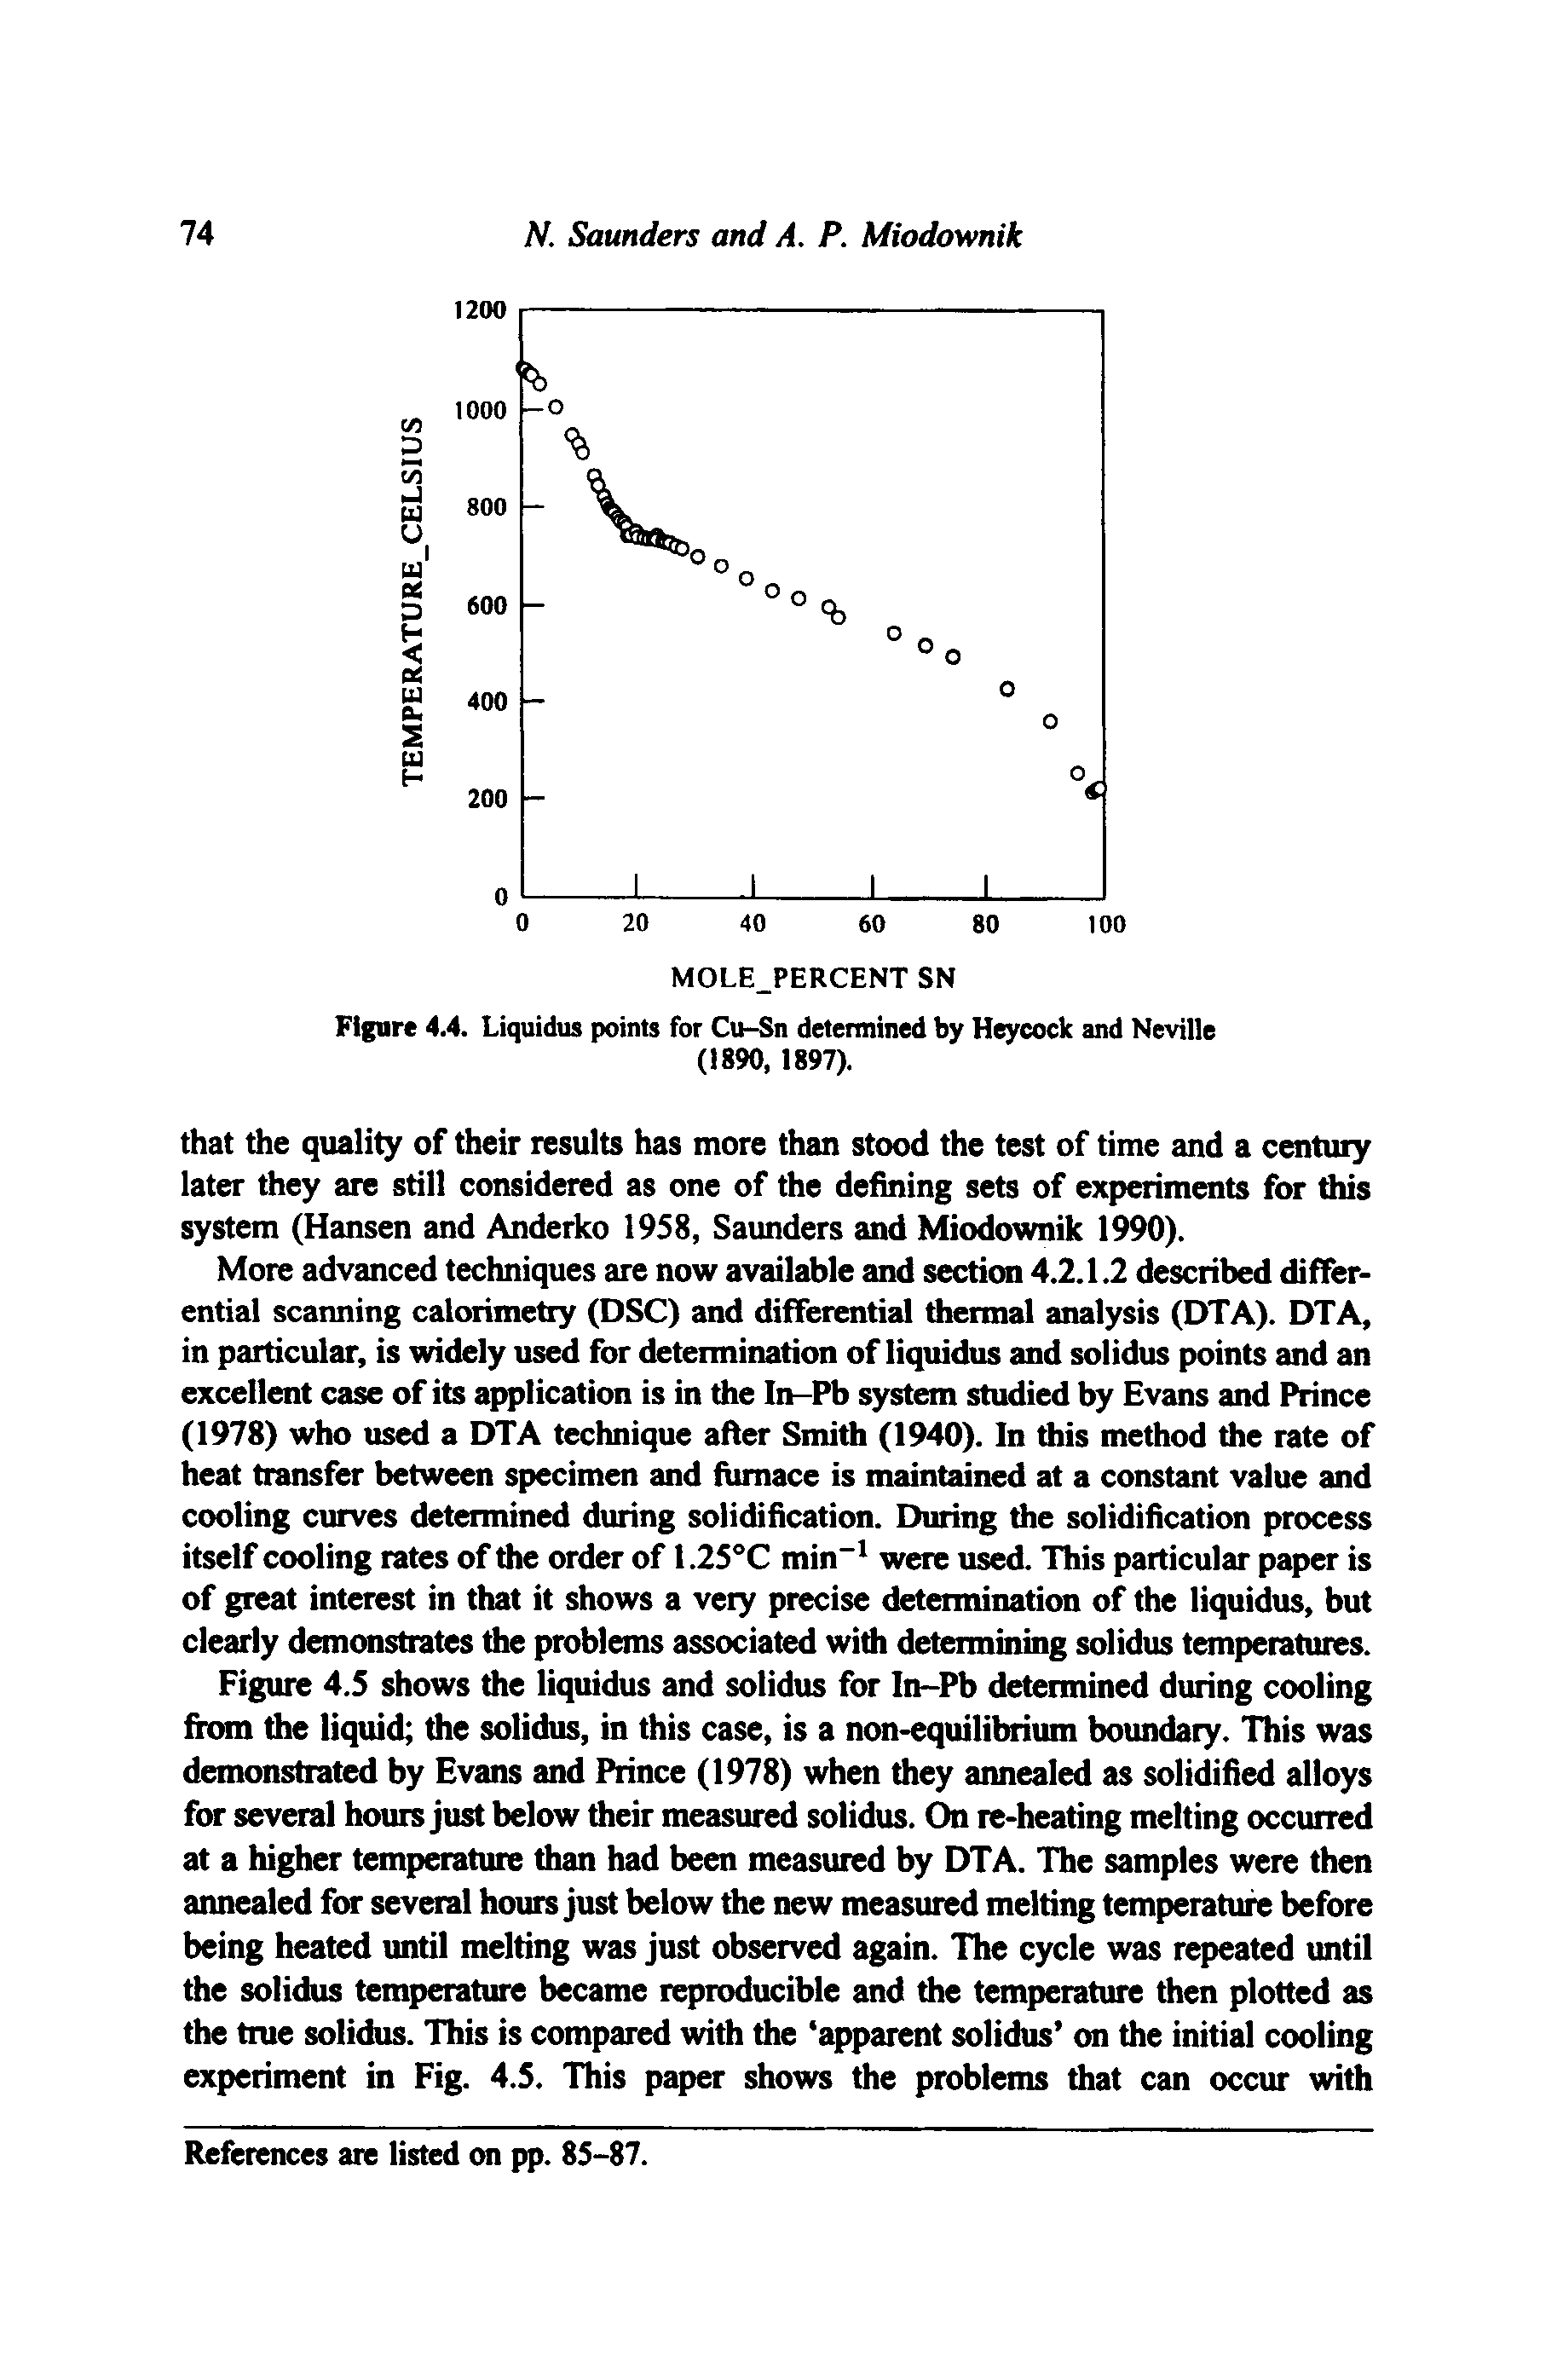 Figure 4.5 shows the liquidus and solidus for In-Pb determined during cooling from the liquid the solidus, in this case, is a non-equilibrium boundary. This was demonstrated by Evans and Prince (1978) when they atmealed as solidified alloys for several hours just below their measured solidus. On re-heating melting occurred at a higher temperature than had been measured by DTA. The samples were then annealed for several hours just below the new measured melting temperature before being heated until melting was just observed again. The cycle was repeated until the solidus temperature became reproducible and the temperature then plotted as the true solidus. This is compared with the apparent solidus on the initial cooling experiment in Fig. 4.5. This paper shows the problems that can occur with...